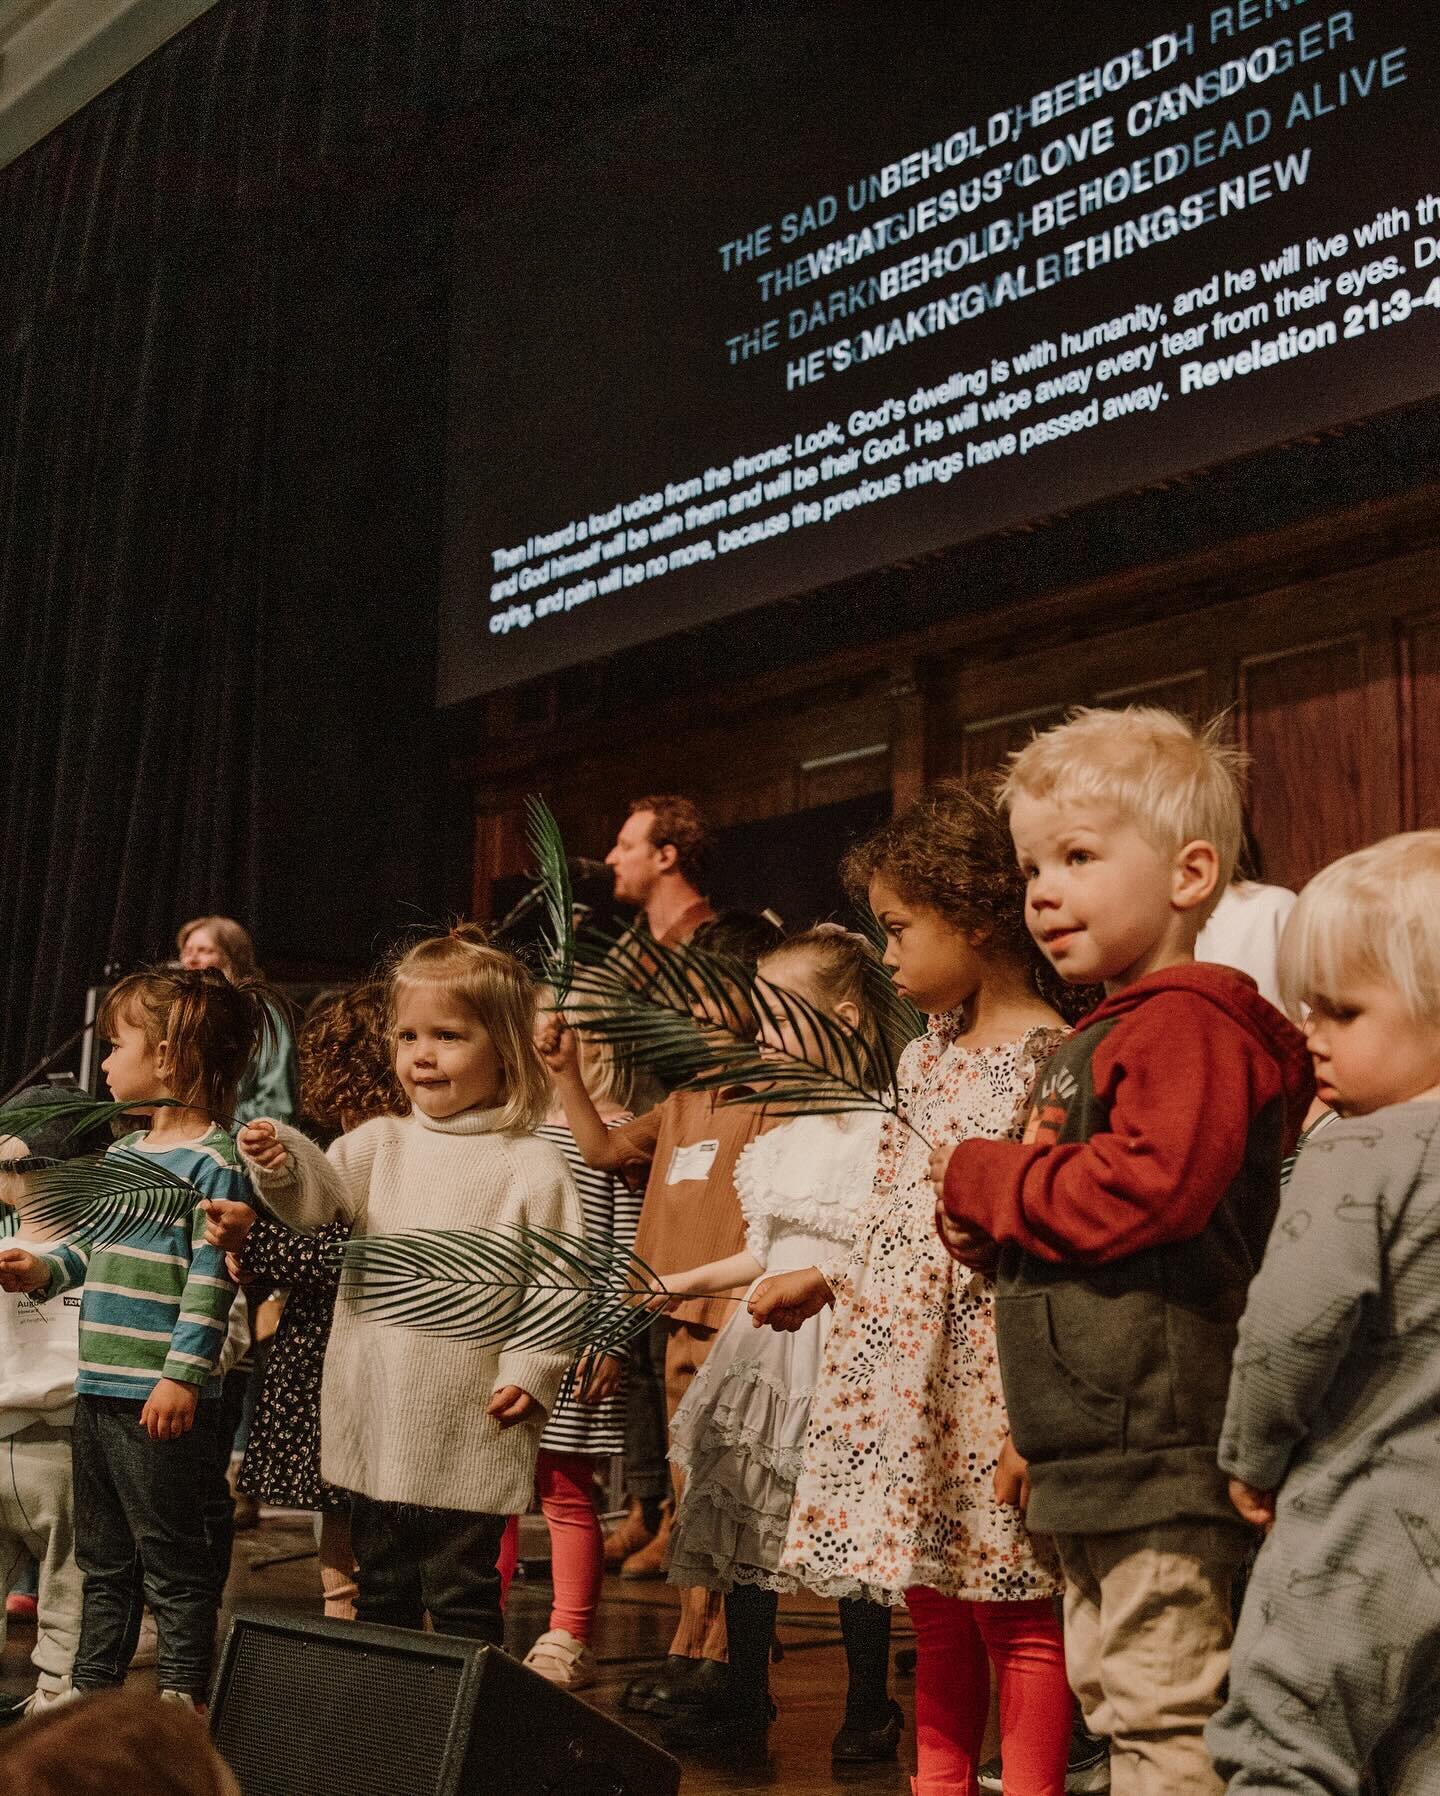 PALM SUNDAY! 

We loved celebrating Palm Sunday with The Heights Kids leading us in worship. A beautiful reminder that Jesus is king, and that kids belong in his kingdom.